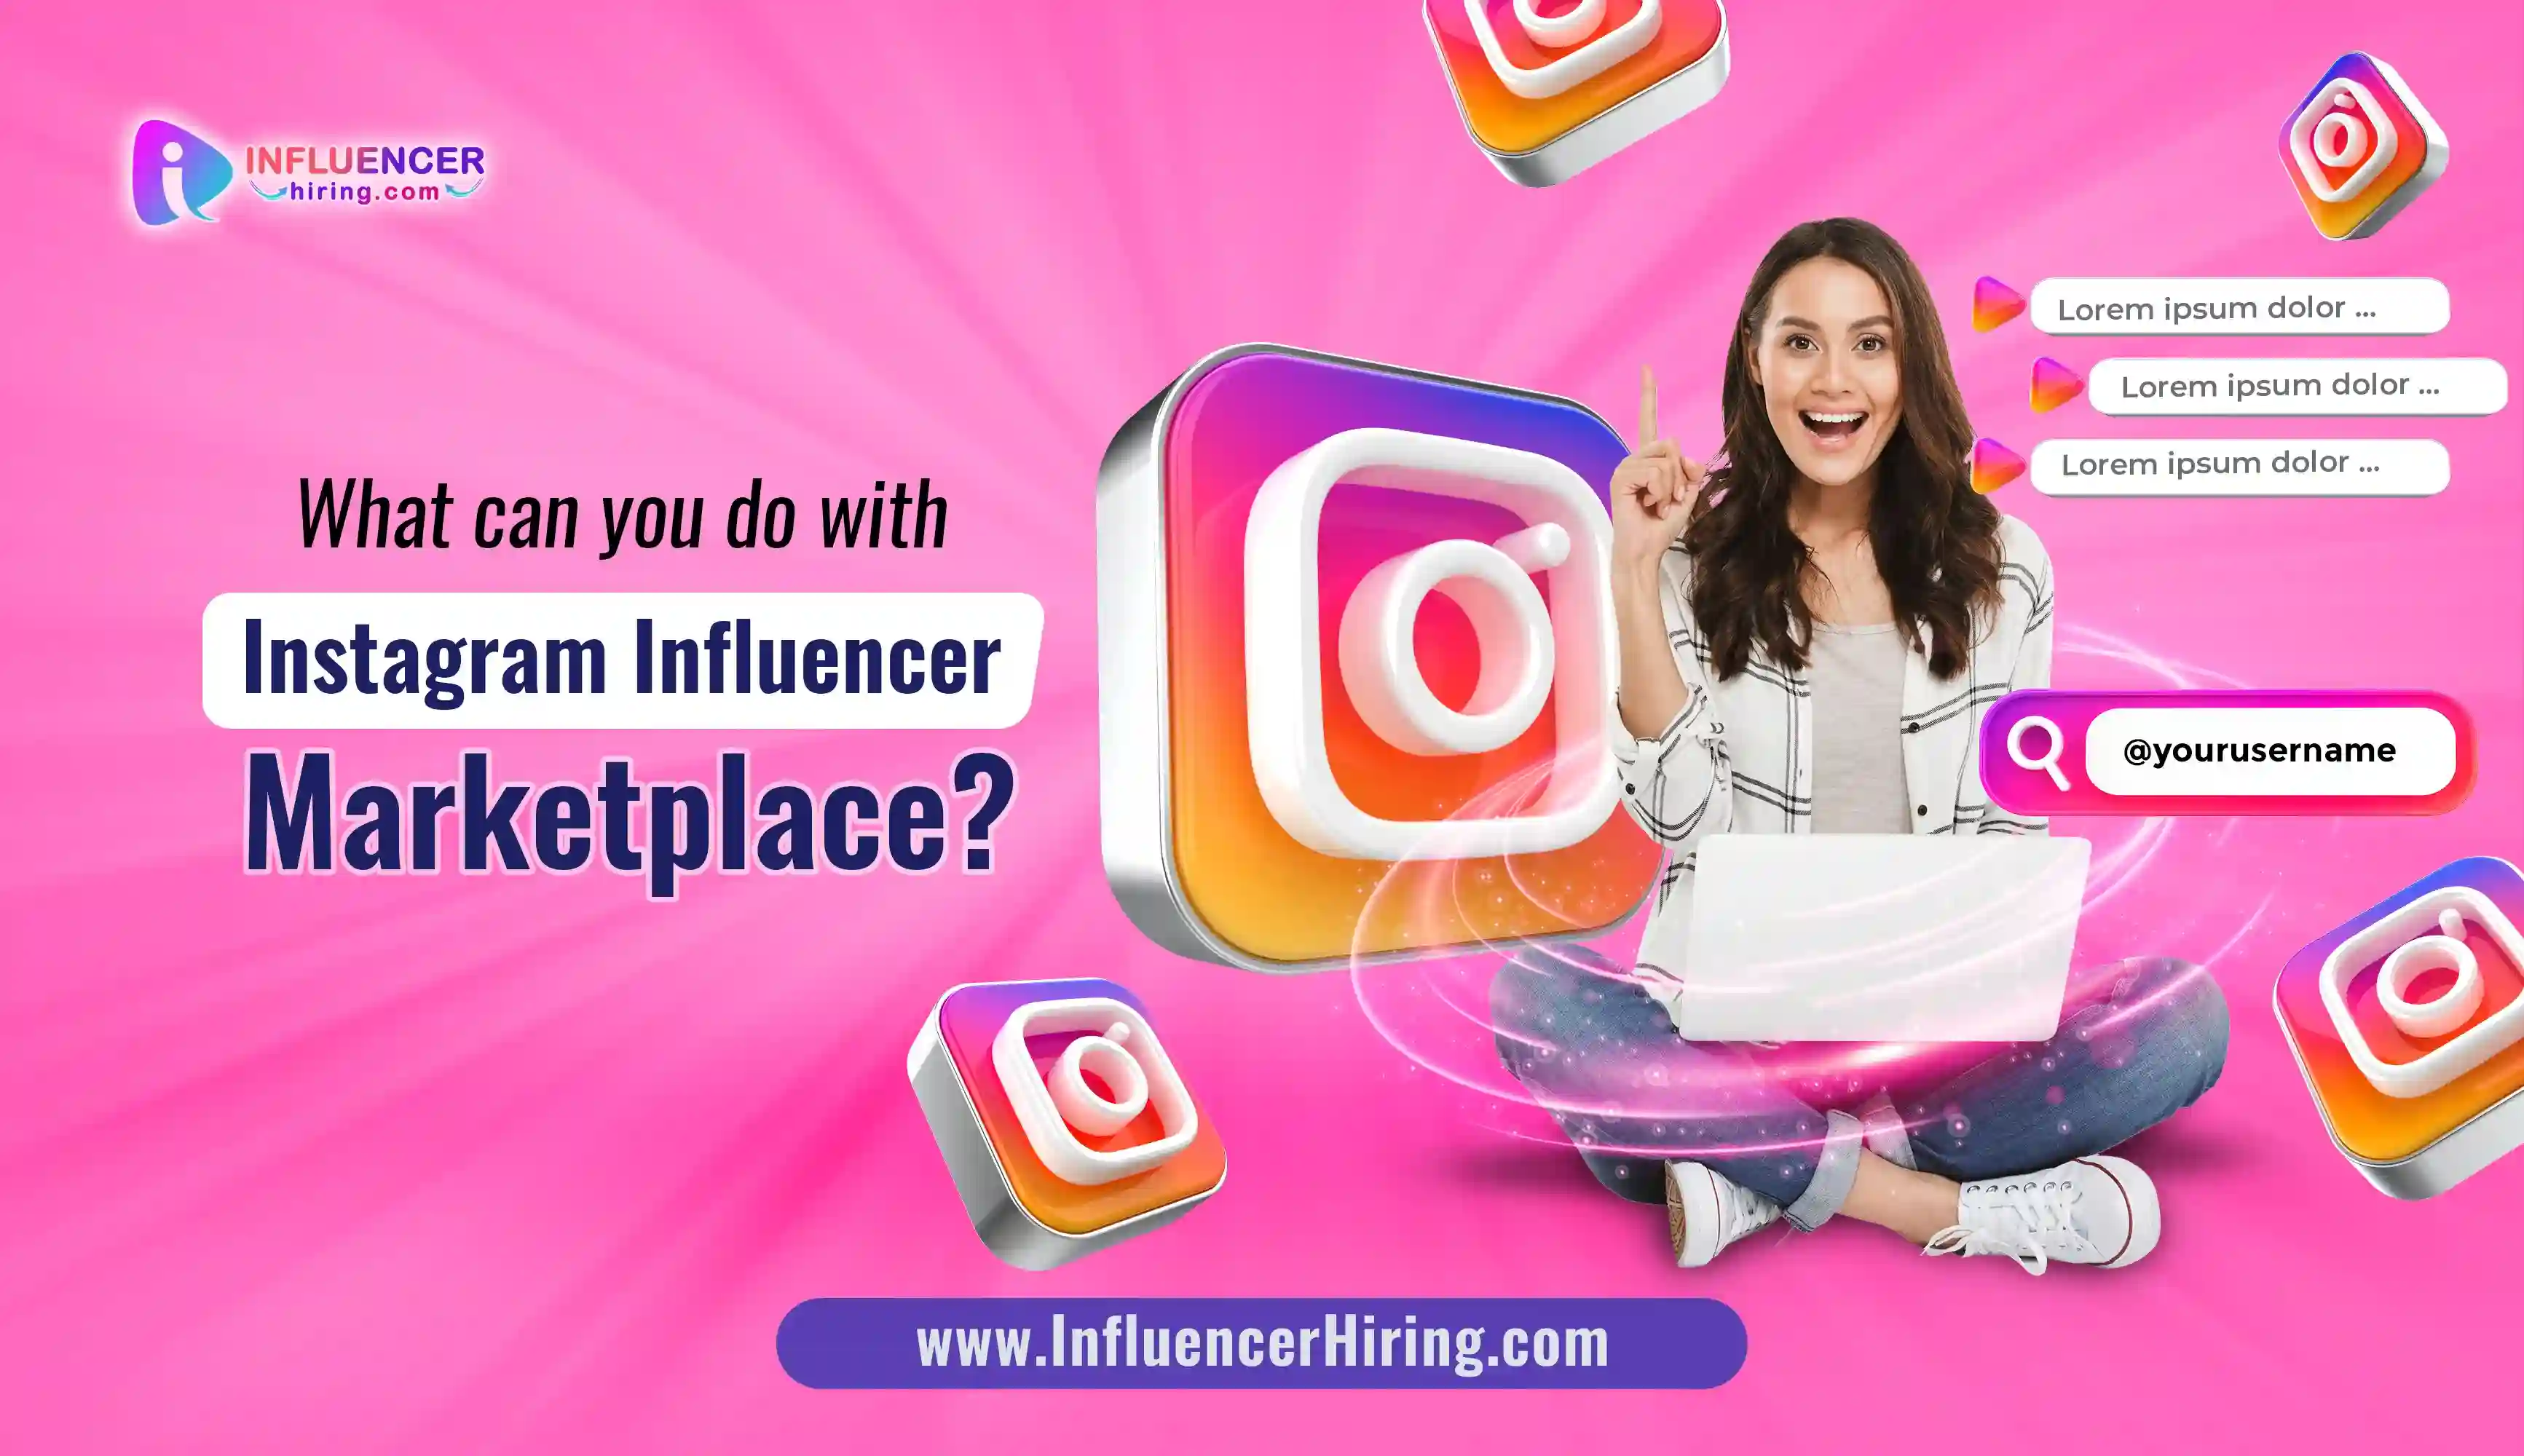 Instagram influencer marketplace connecting brands with influencers for authentic collaborations